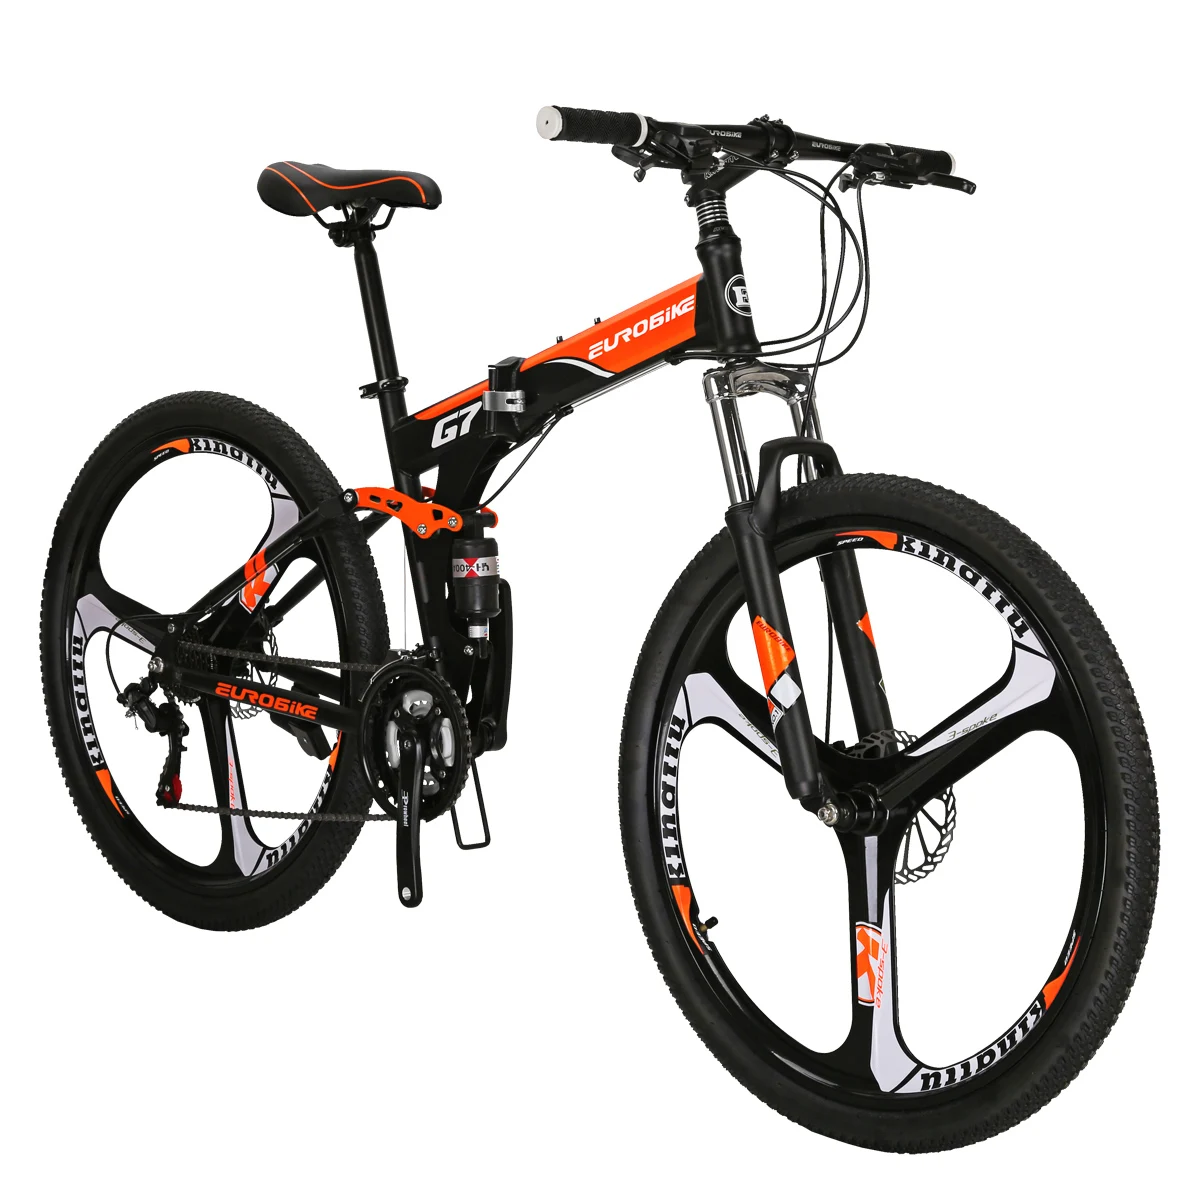 

Eurobike Folding MTB G7 27.5 inches bicic dual suspension mountain bike Shi mano groupset 21 speed MTB bicycle frames in stock